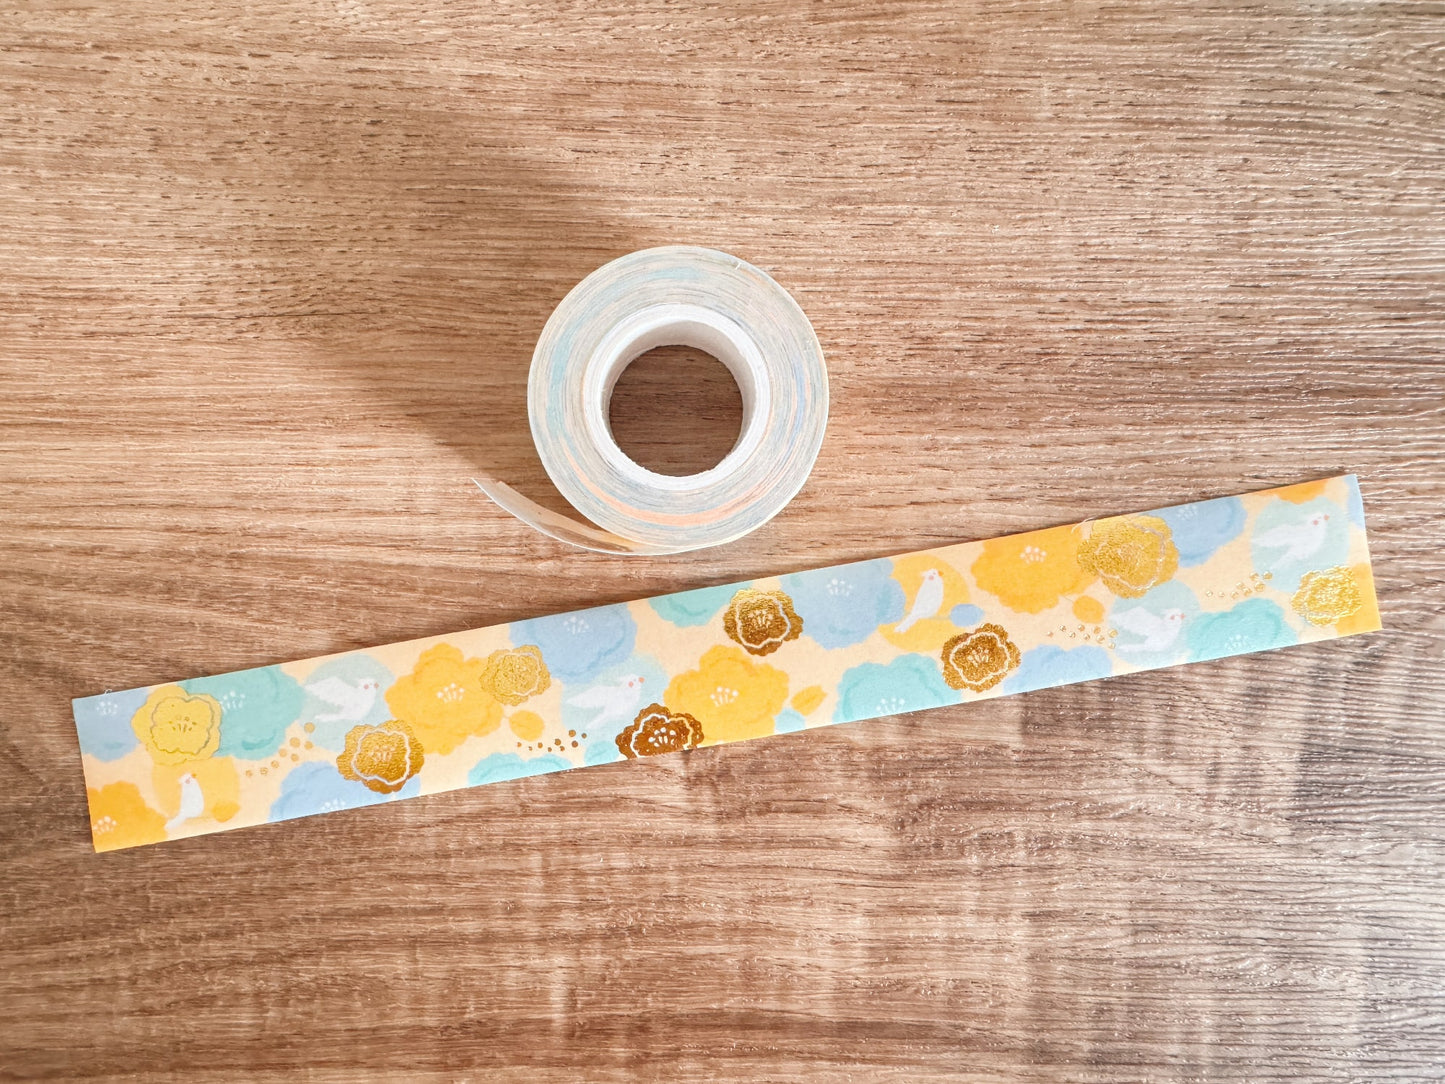 Playing in the Garden : Lisianthus 桔梗 - Gold Foil Stamping Washi Tape